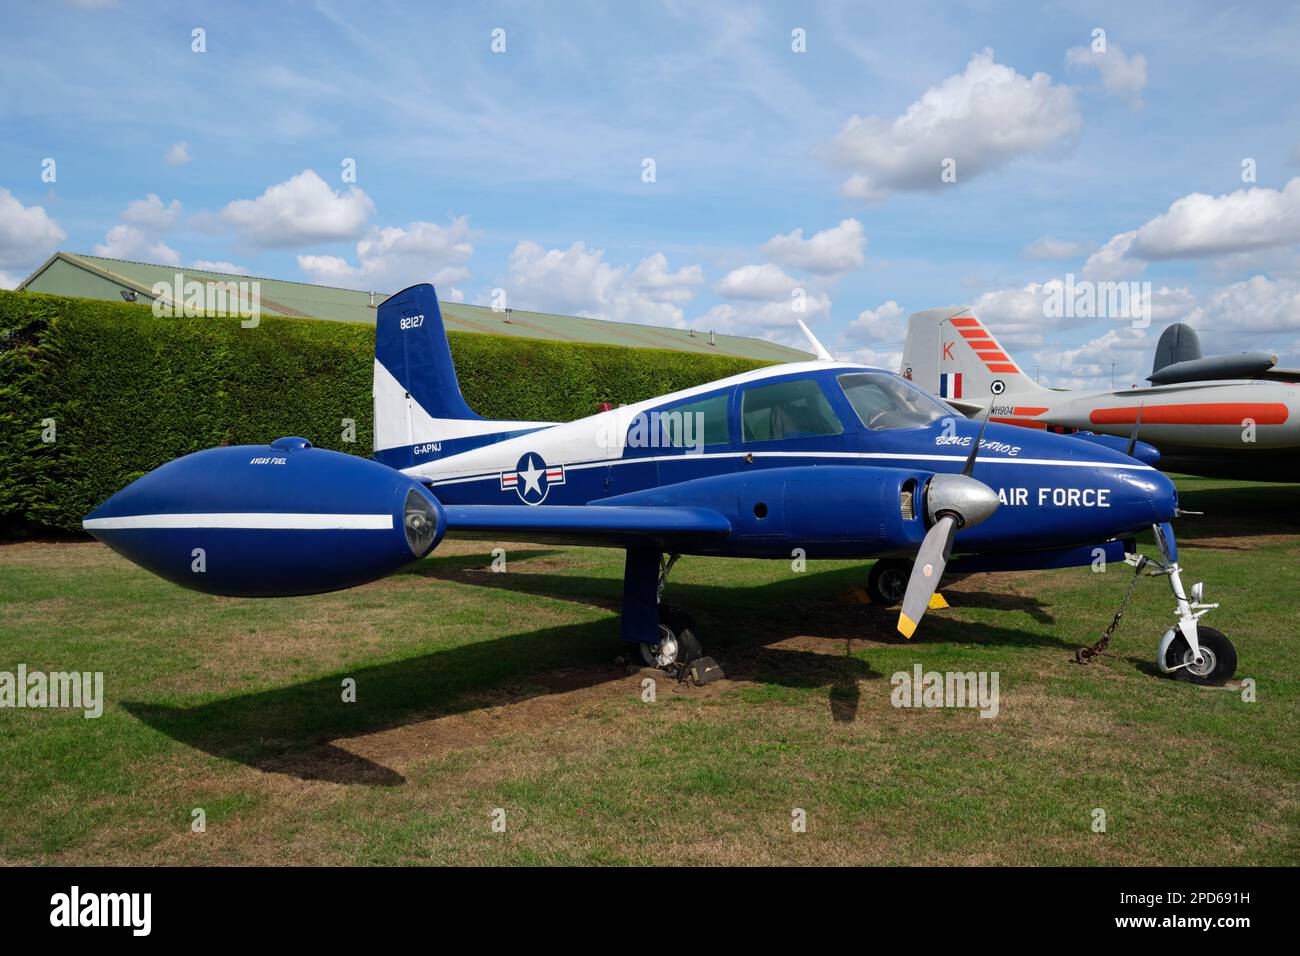 A Cessna 310A on display at the Newark Air Museum, Nottinghamshire, England. It has been repainted as a USAF U-3A 'Blue Canoe' aircraft. Stock Photo